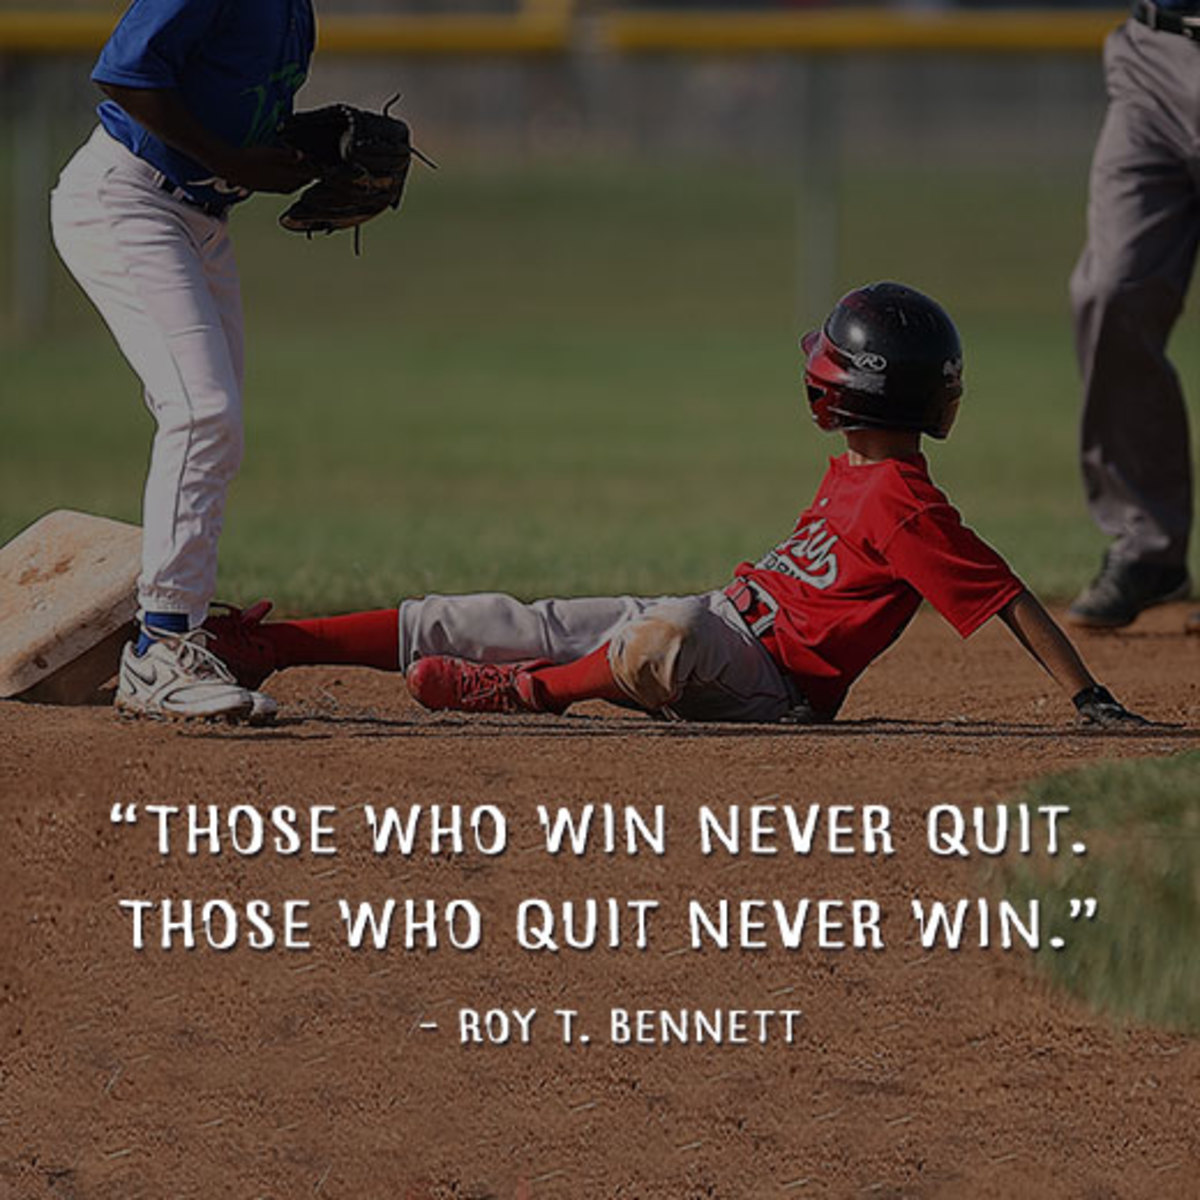 Those who win never quit. Those who quit never win.” ― Roy T. Bennett